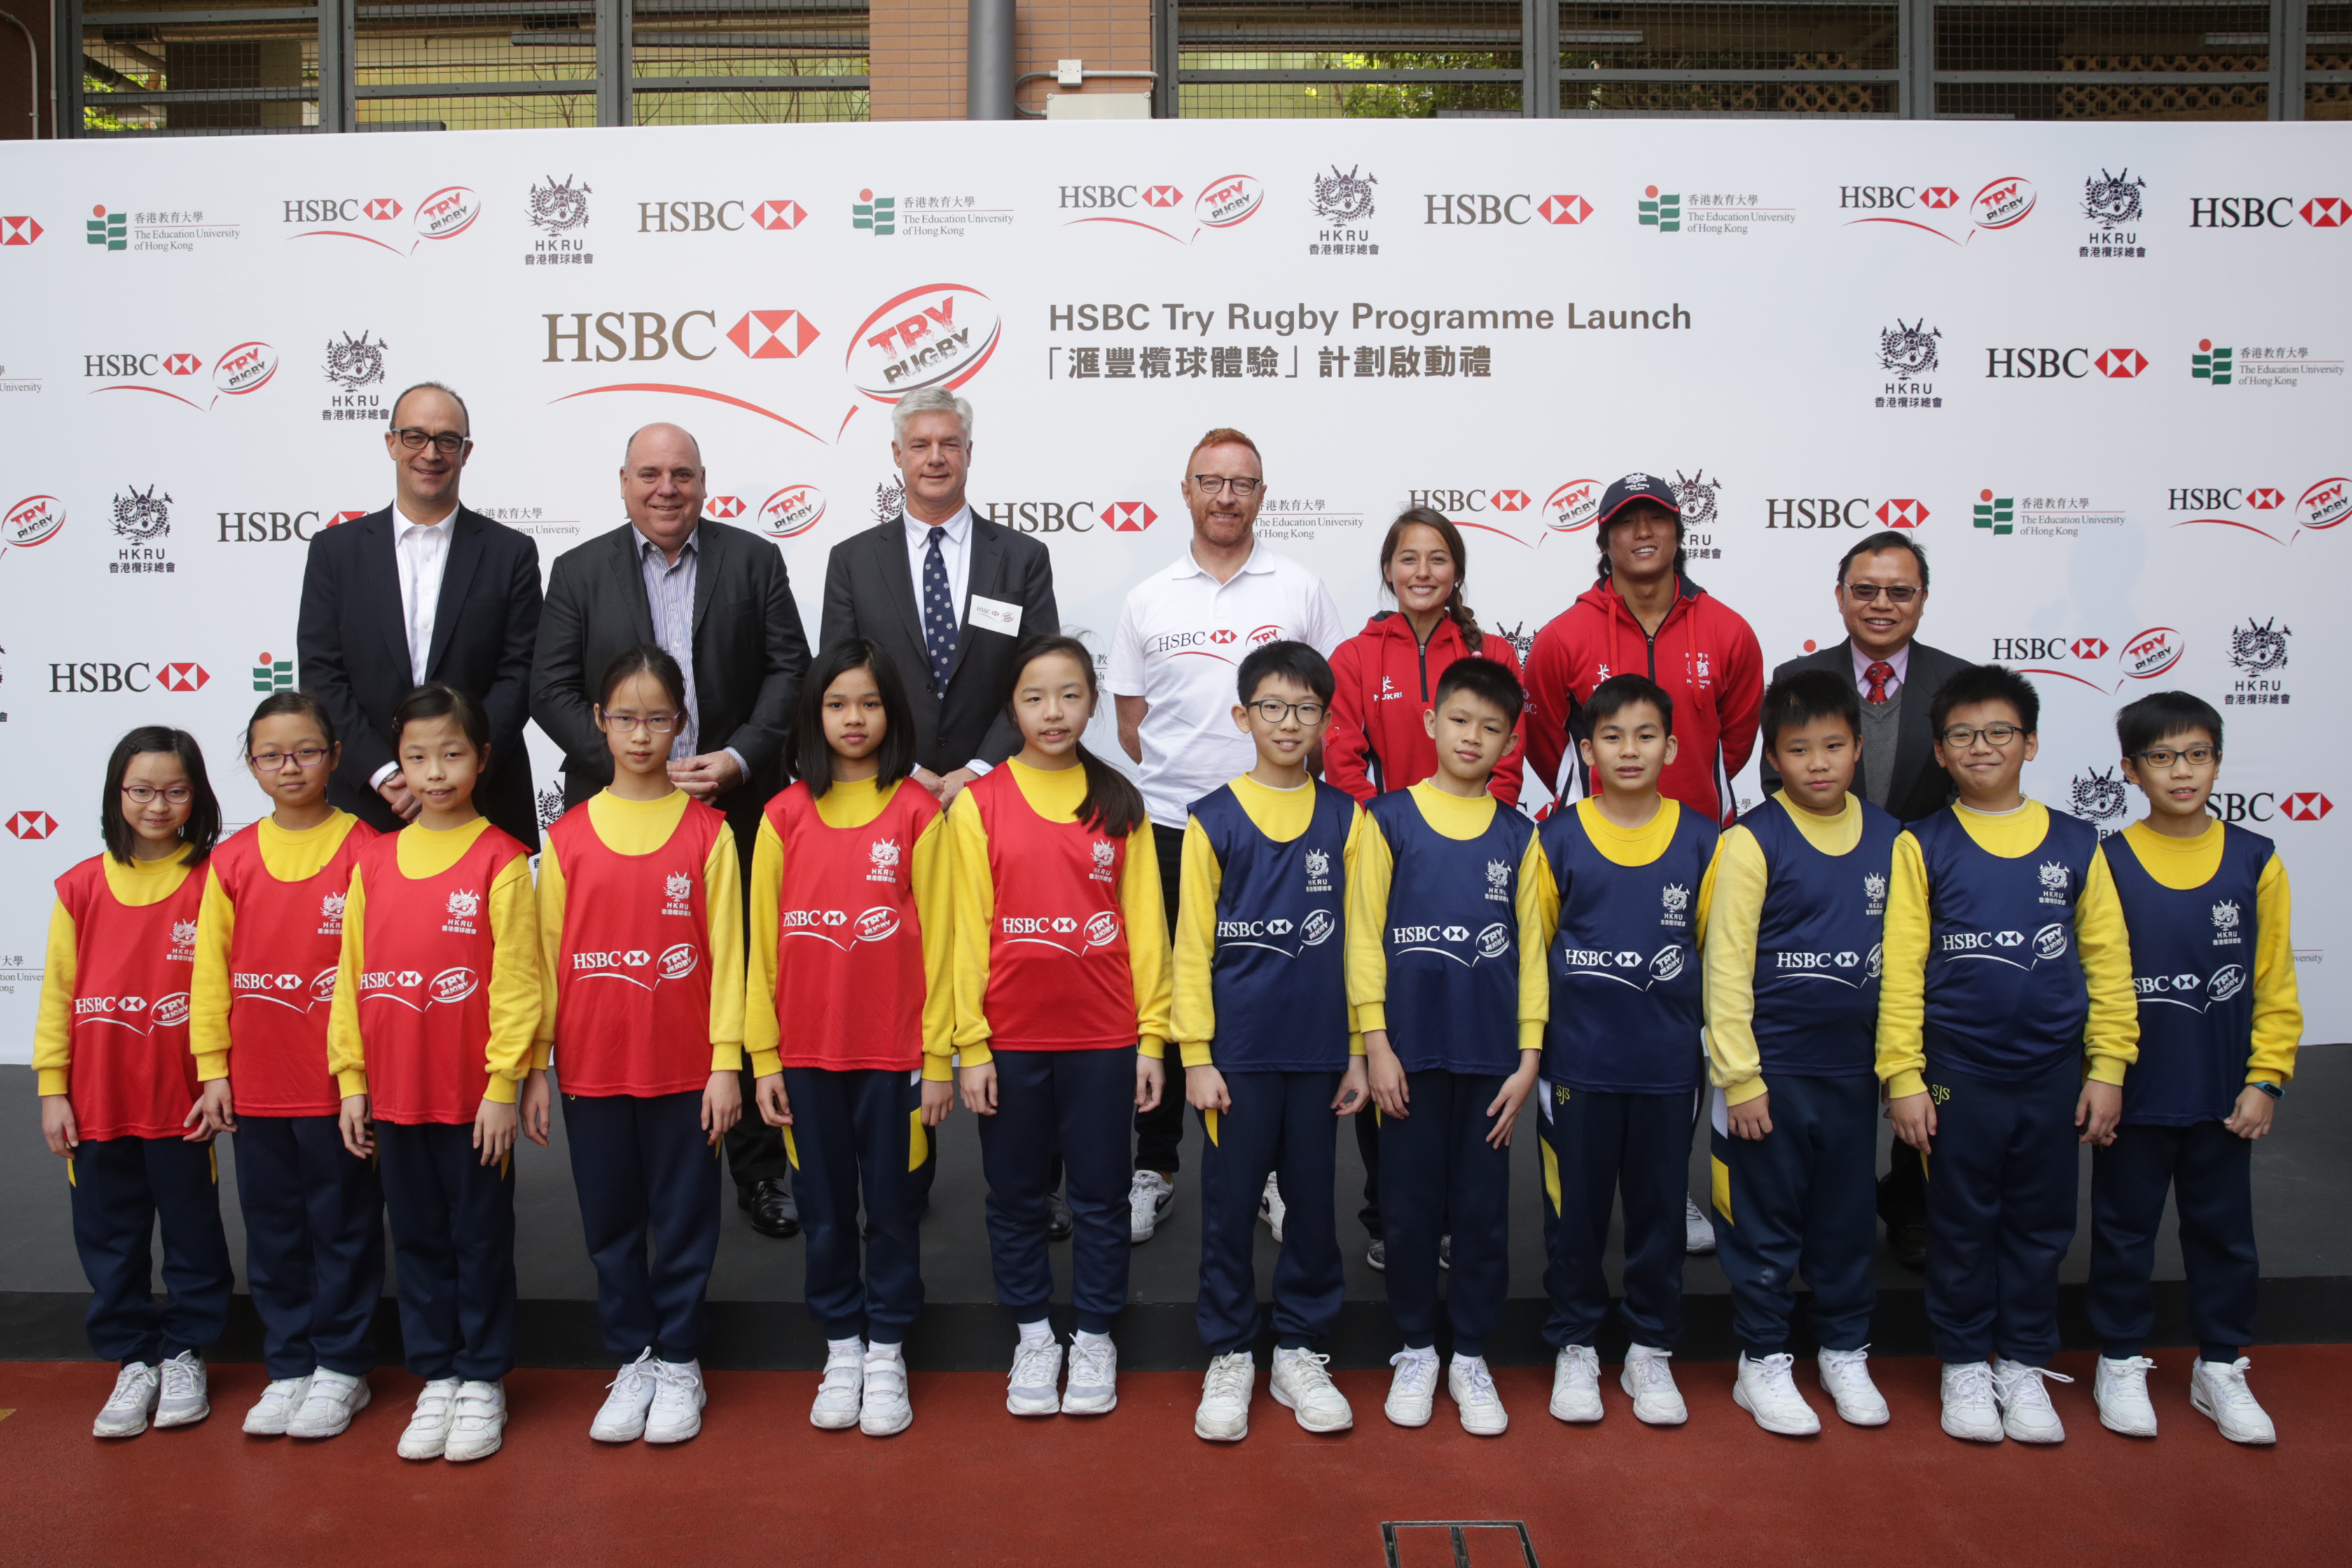 Mr. Ben Ryan, 2016 Olympic Gold Medal winning Rugby Sevens coach  (middle on back row), and Hong Kong Rugby Team members Ms. Lindsay  Varty (third from right, second row) and Mr. Cado Lee Ka-to (second from  right, second row) were special guests. They shared their thoughts on how  rugby can benefit children’s development and how they see the development  of rugby in Hong Kong. 